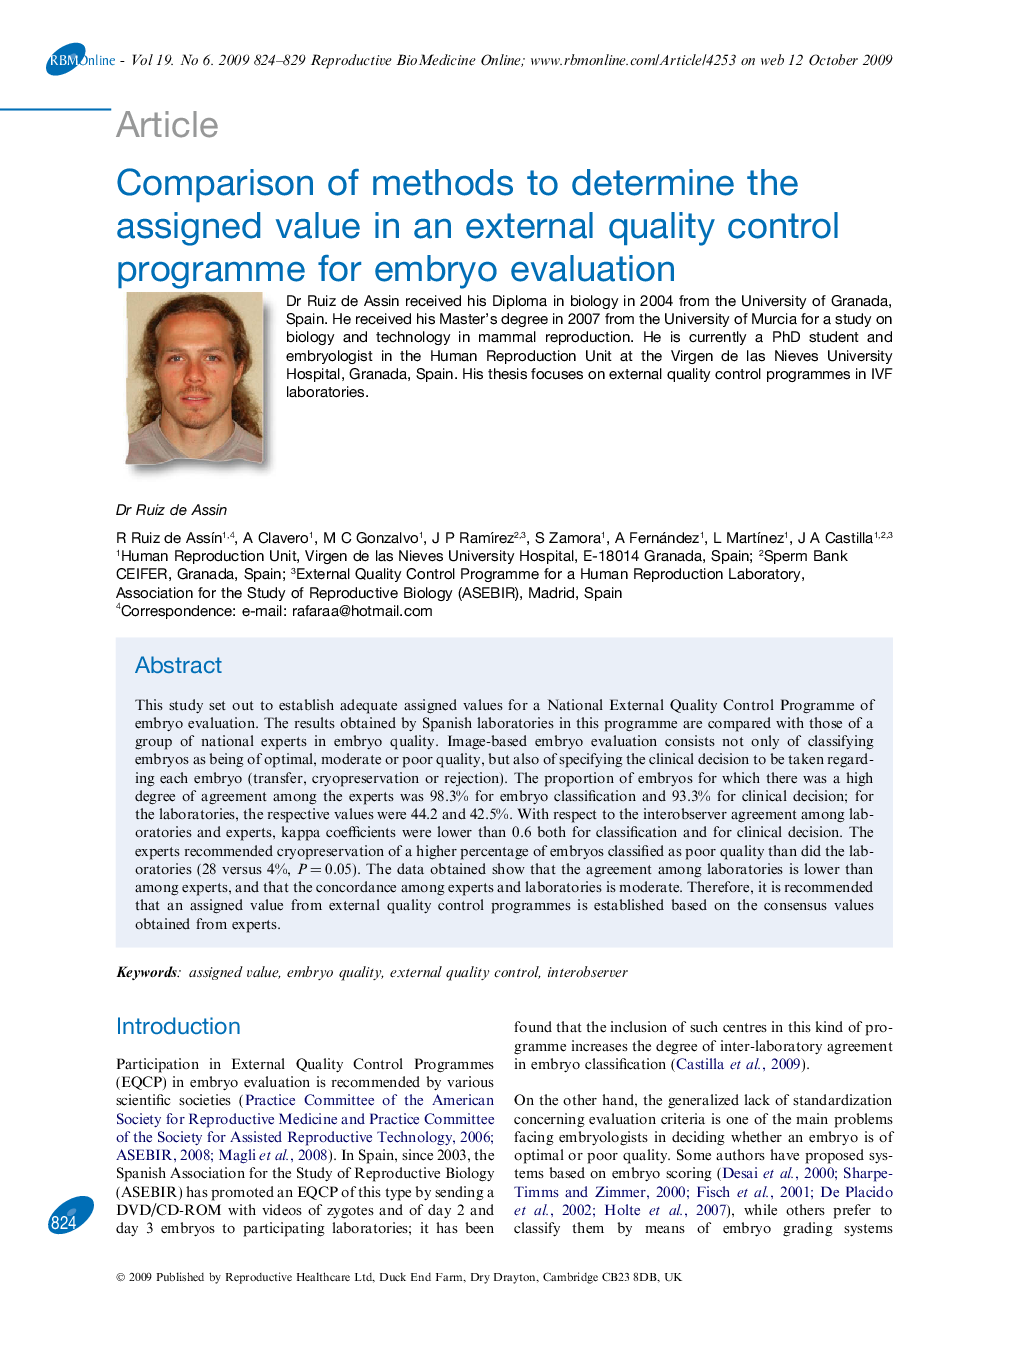 Comparison of methods to determine the assigned value in an external quality control programme for embryo evaluation 